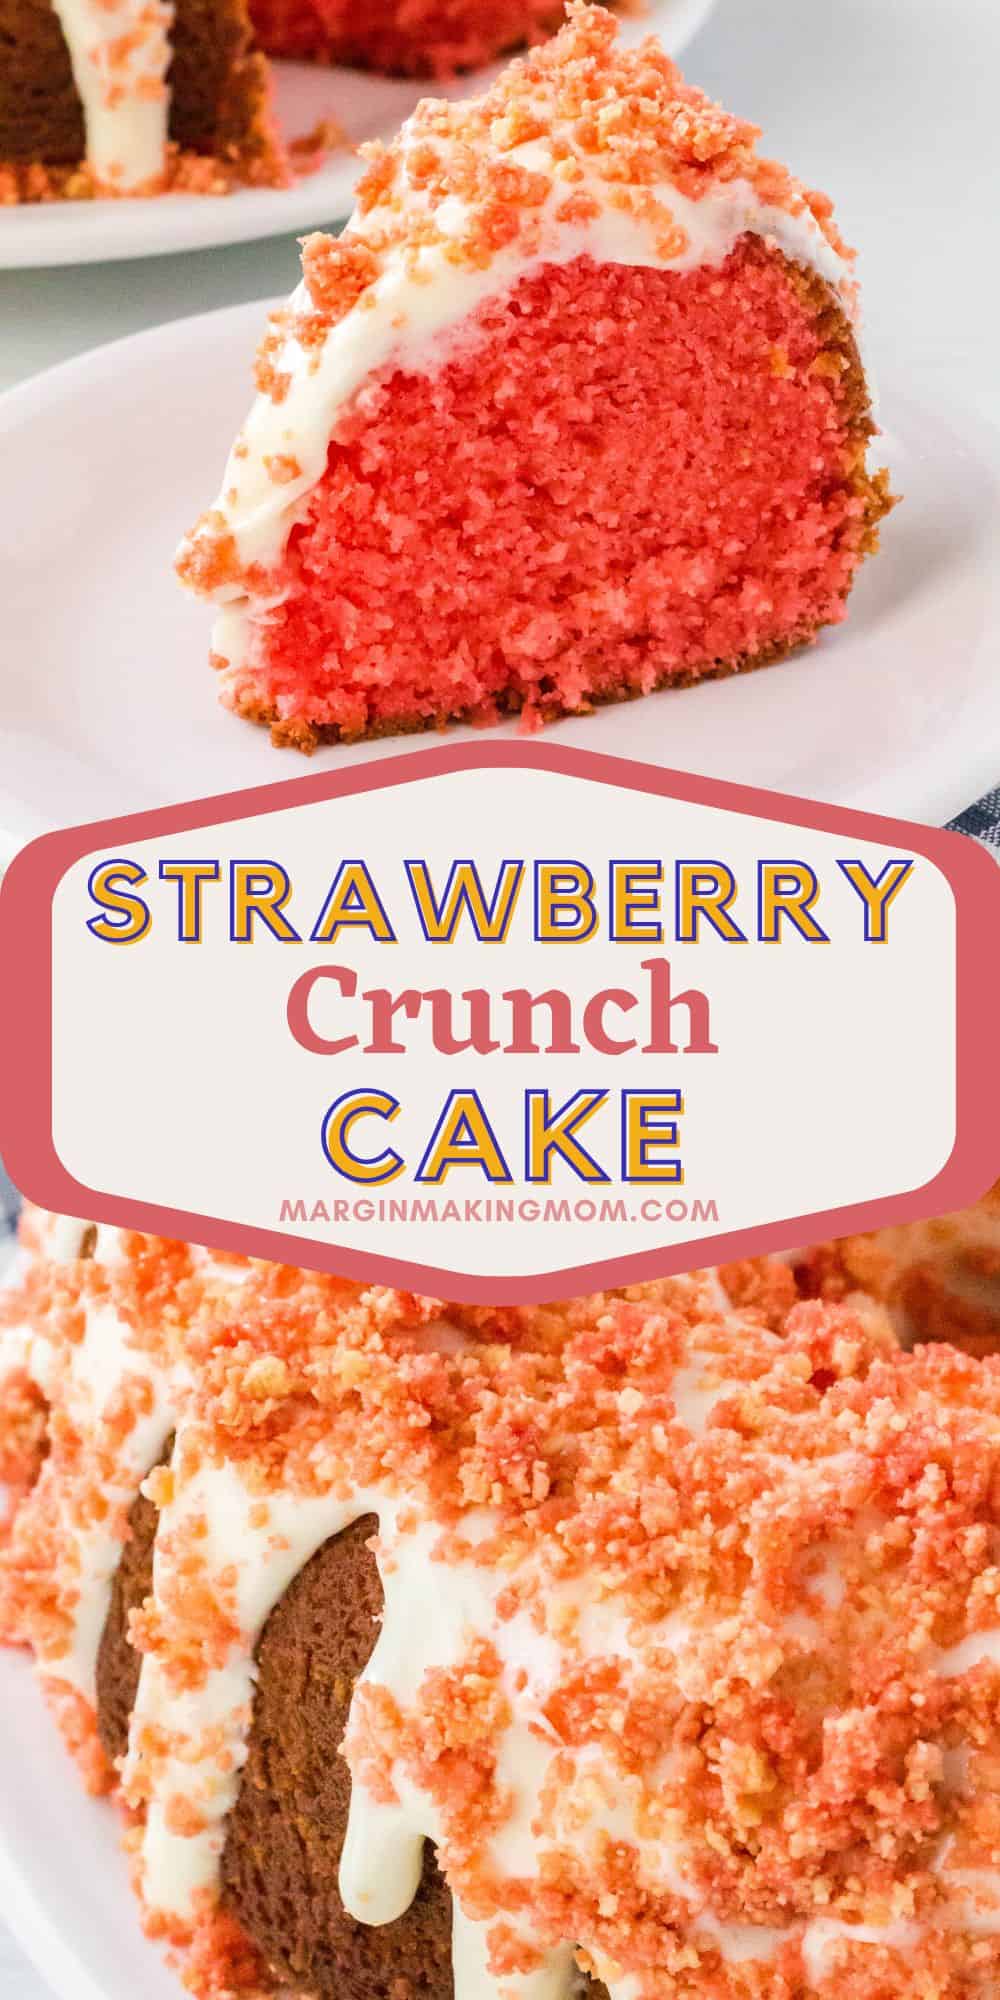 two photos; one shows a close-up side view of a slice of strawberry pound cake with crunch topping, the other shows a close-up of the whole bundt cake.